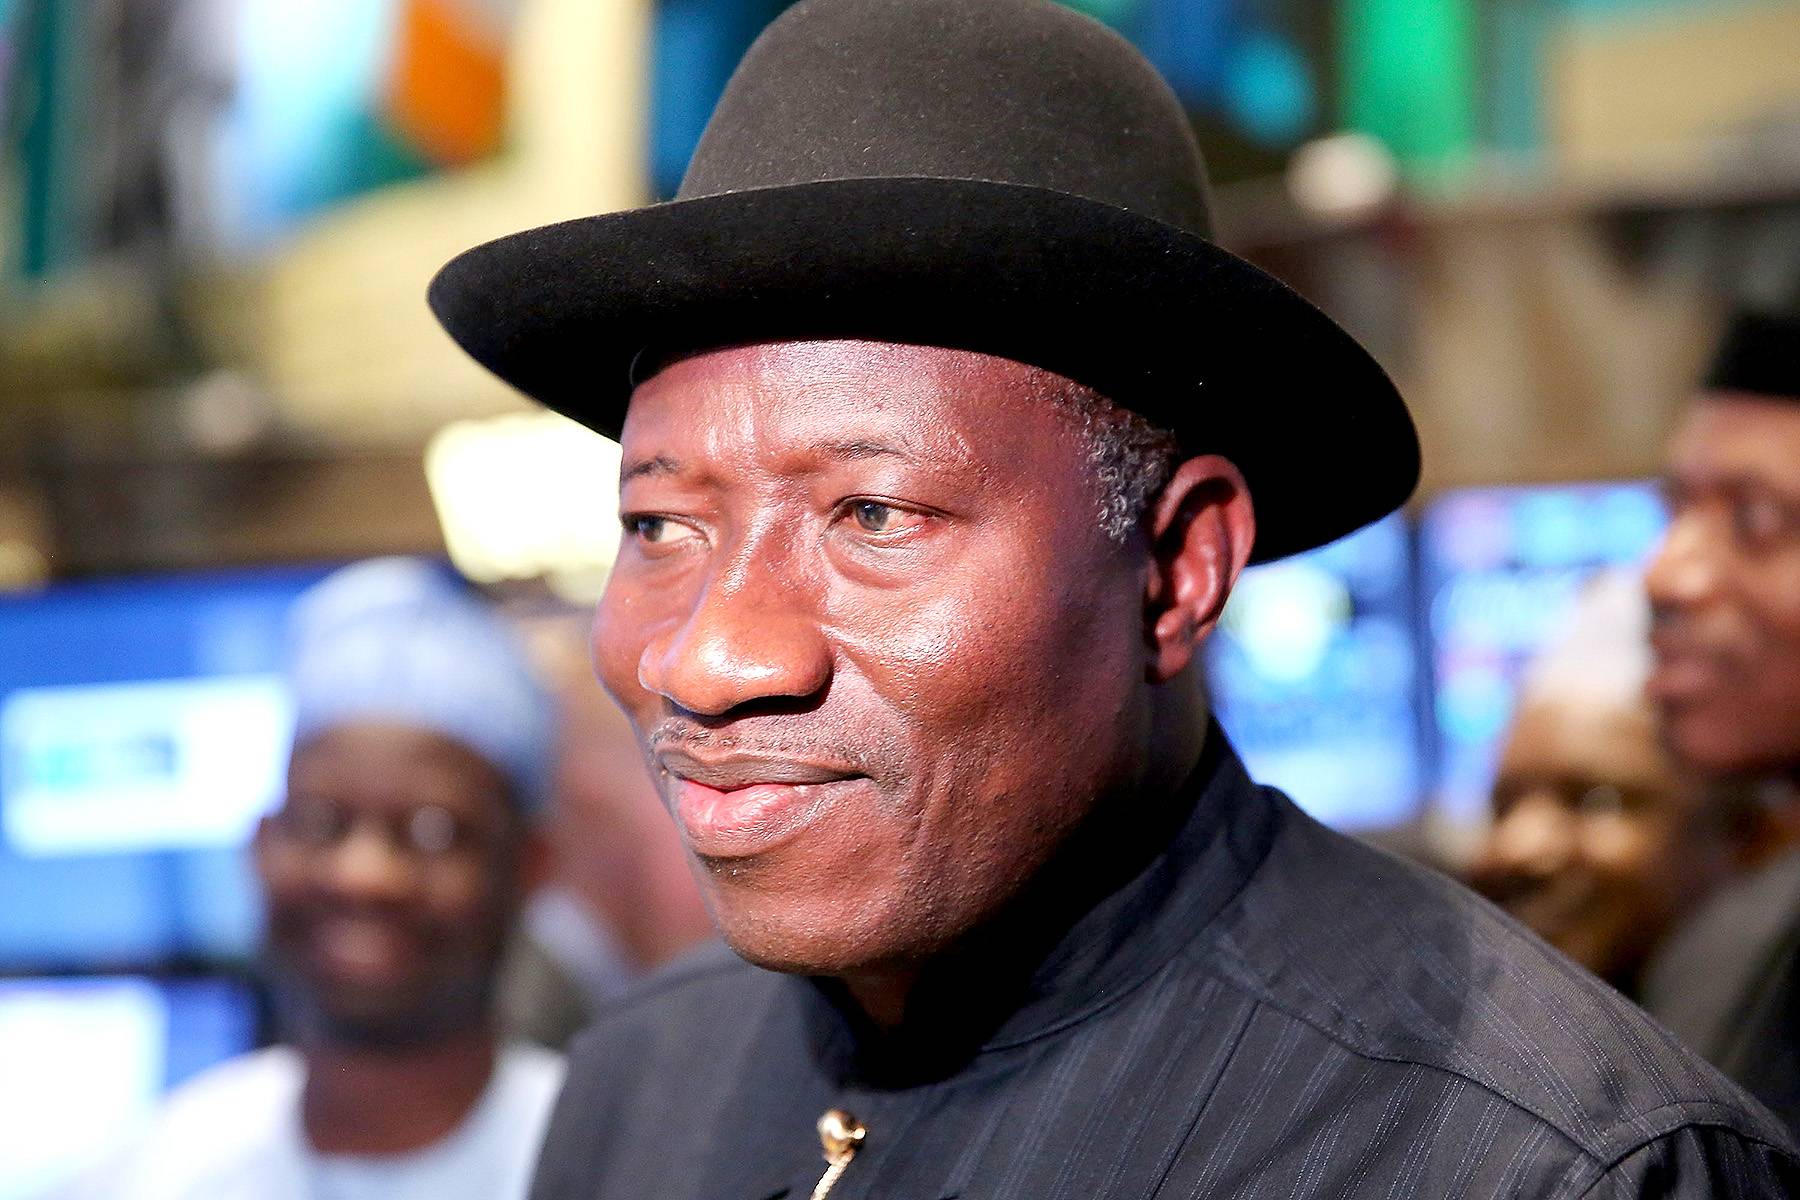 Nigeria President Jonathan Meets With Families of Missing Girls